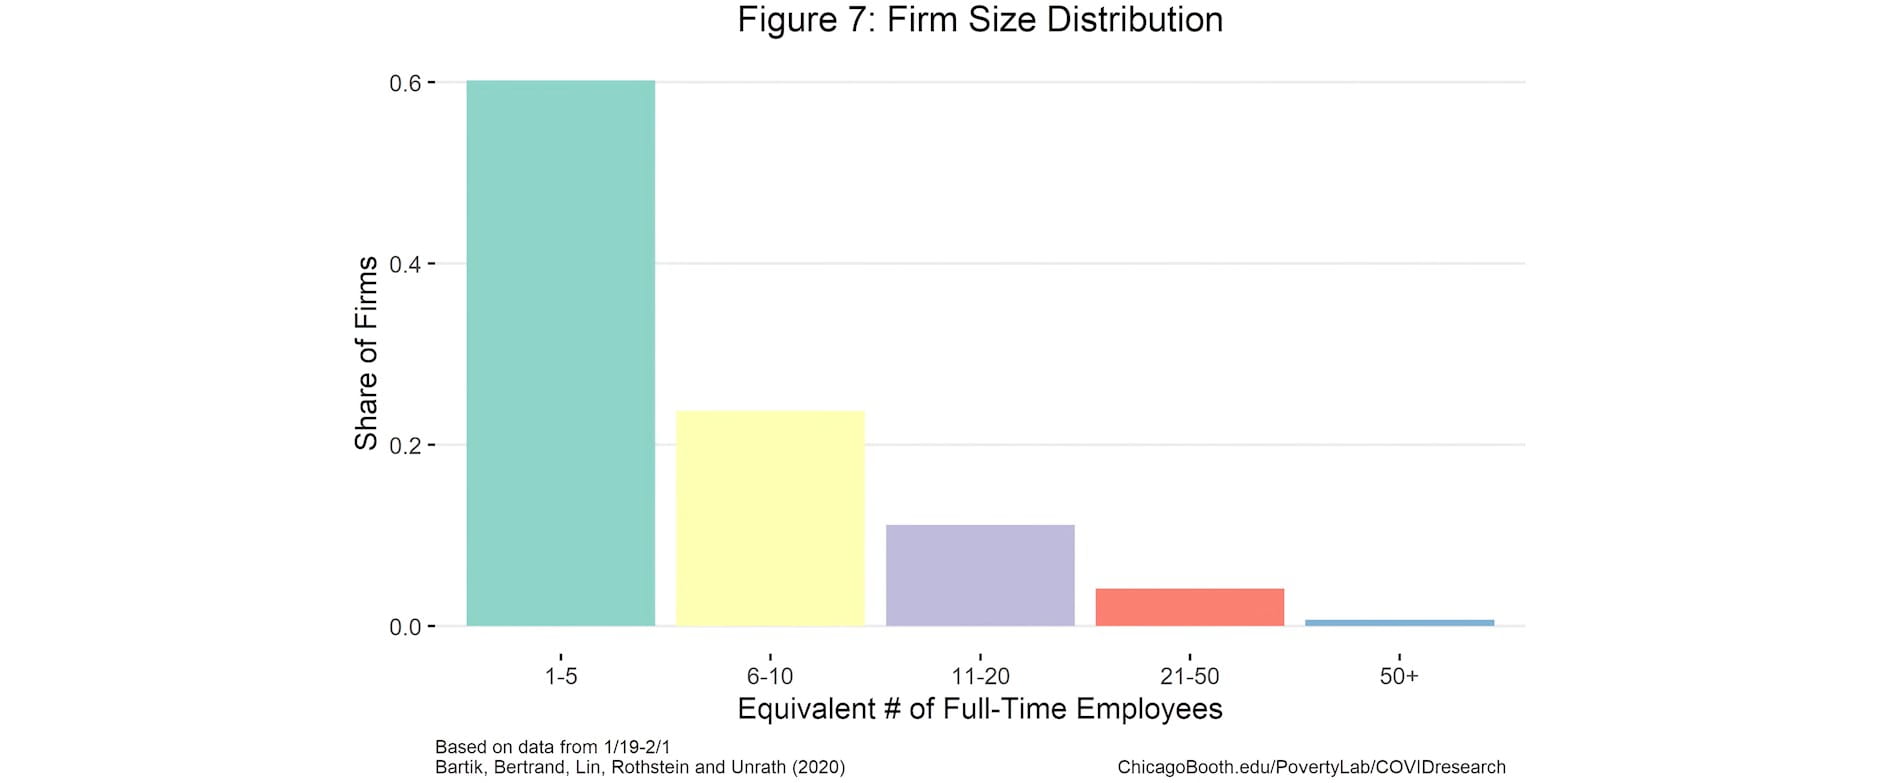 Figure 7: almost all Homebase firms have 50 full-time equivalent employees or less